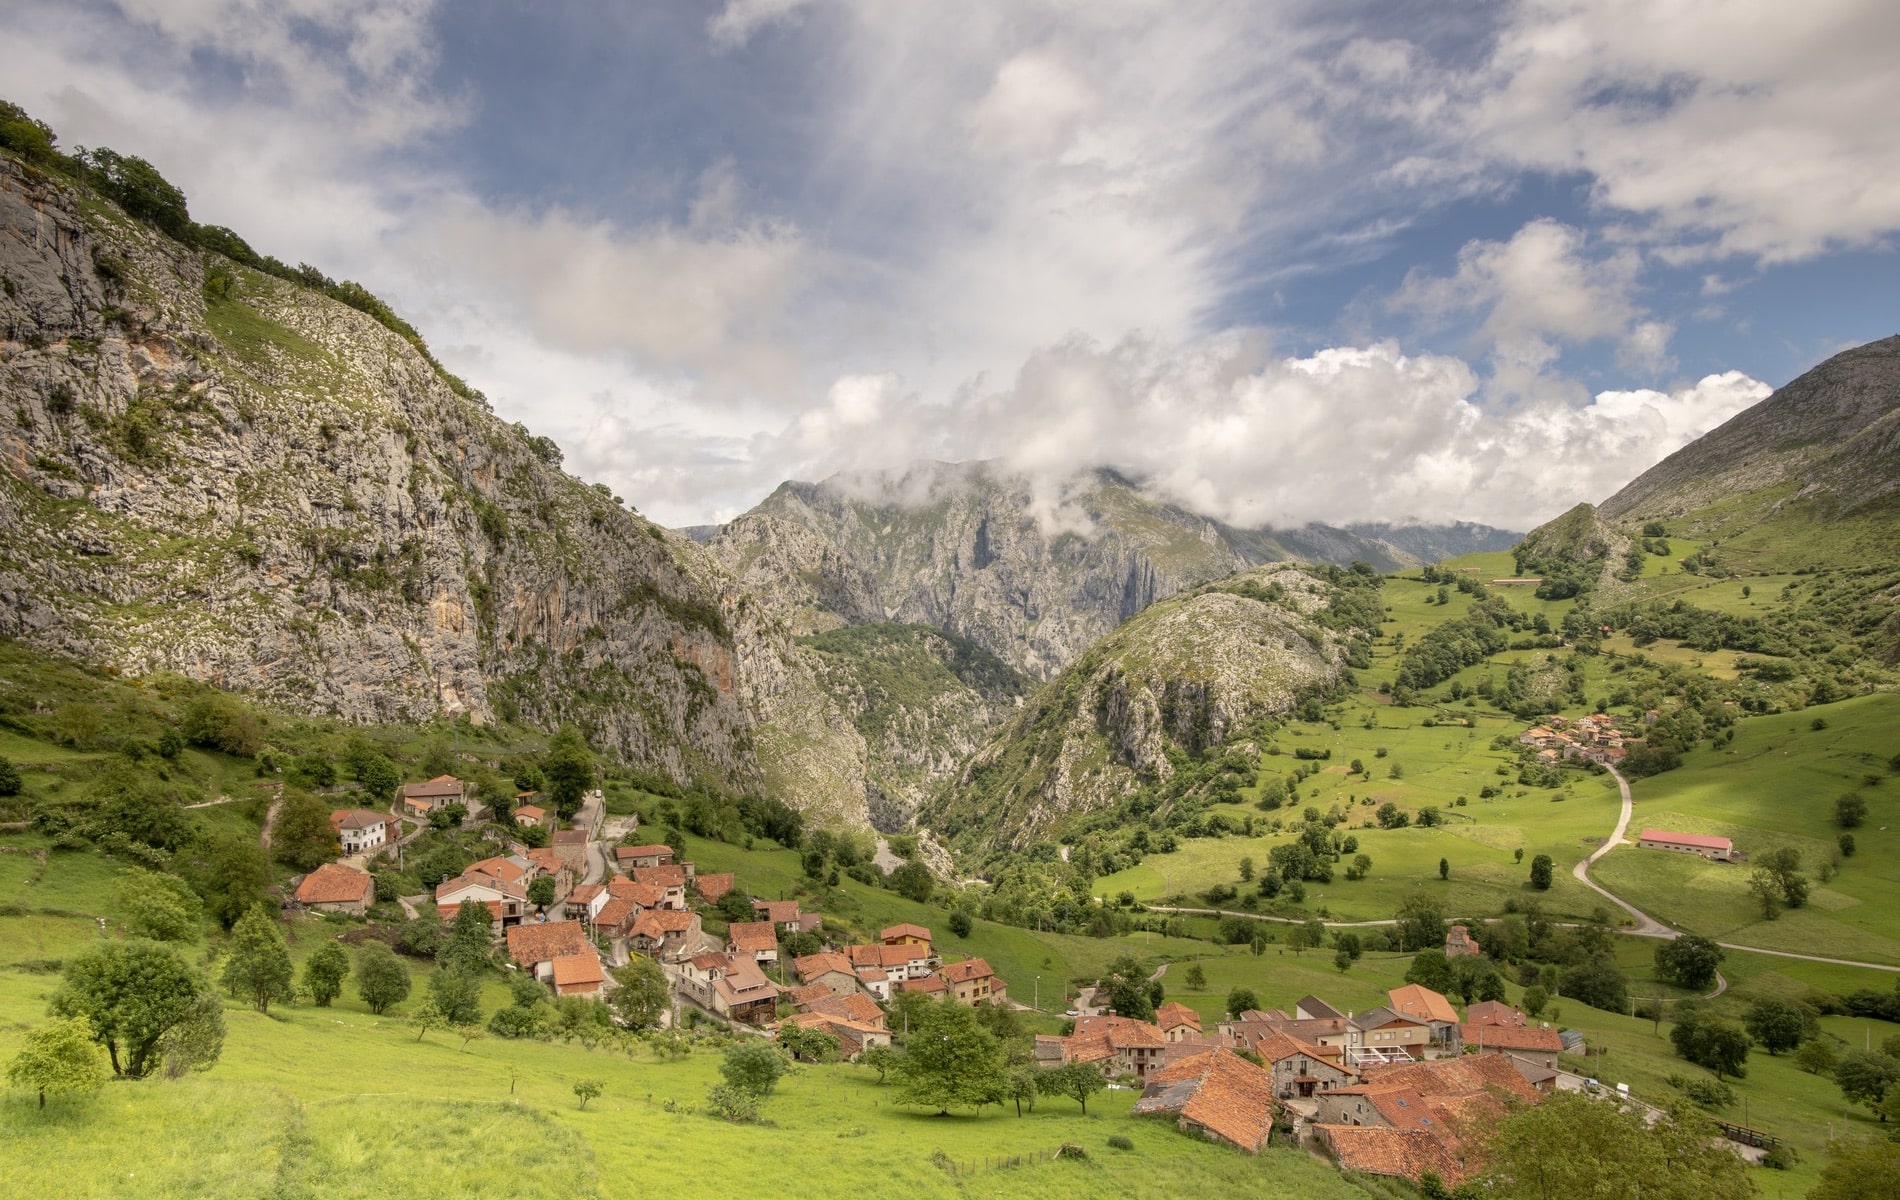 The valleys of the Picos de Europa (Peaks of Europe) in northern Spain are lush and green, full of quaint villages, and perfect for hiking.